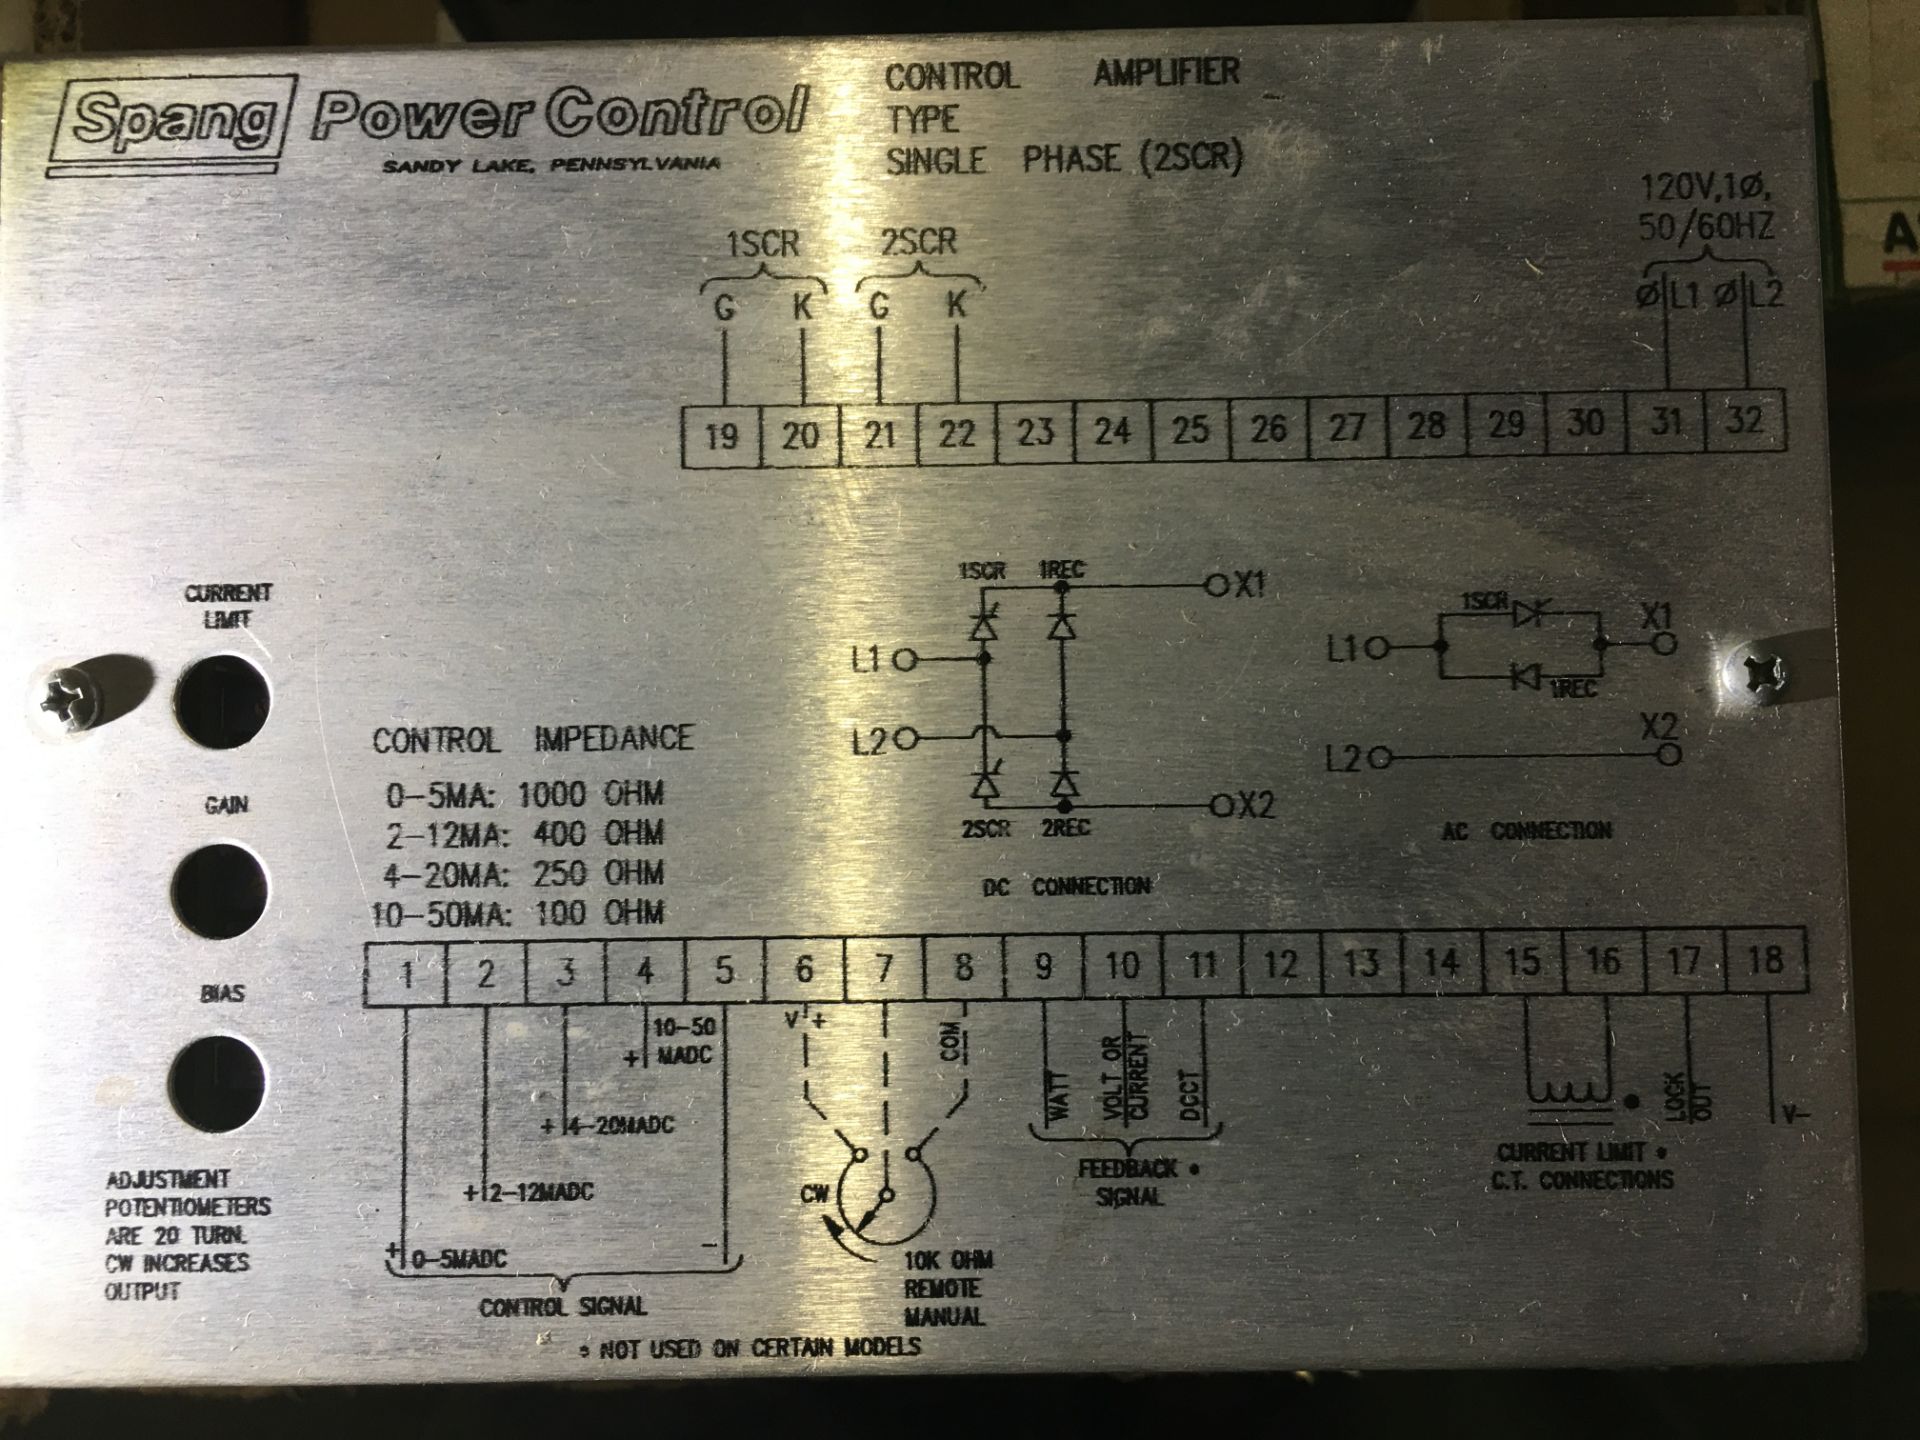 Spang Power Control Amplifiers - Image 2 of 3